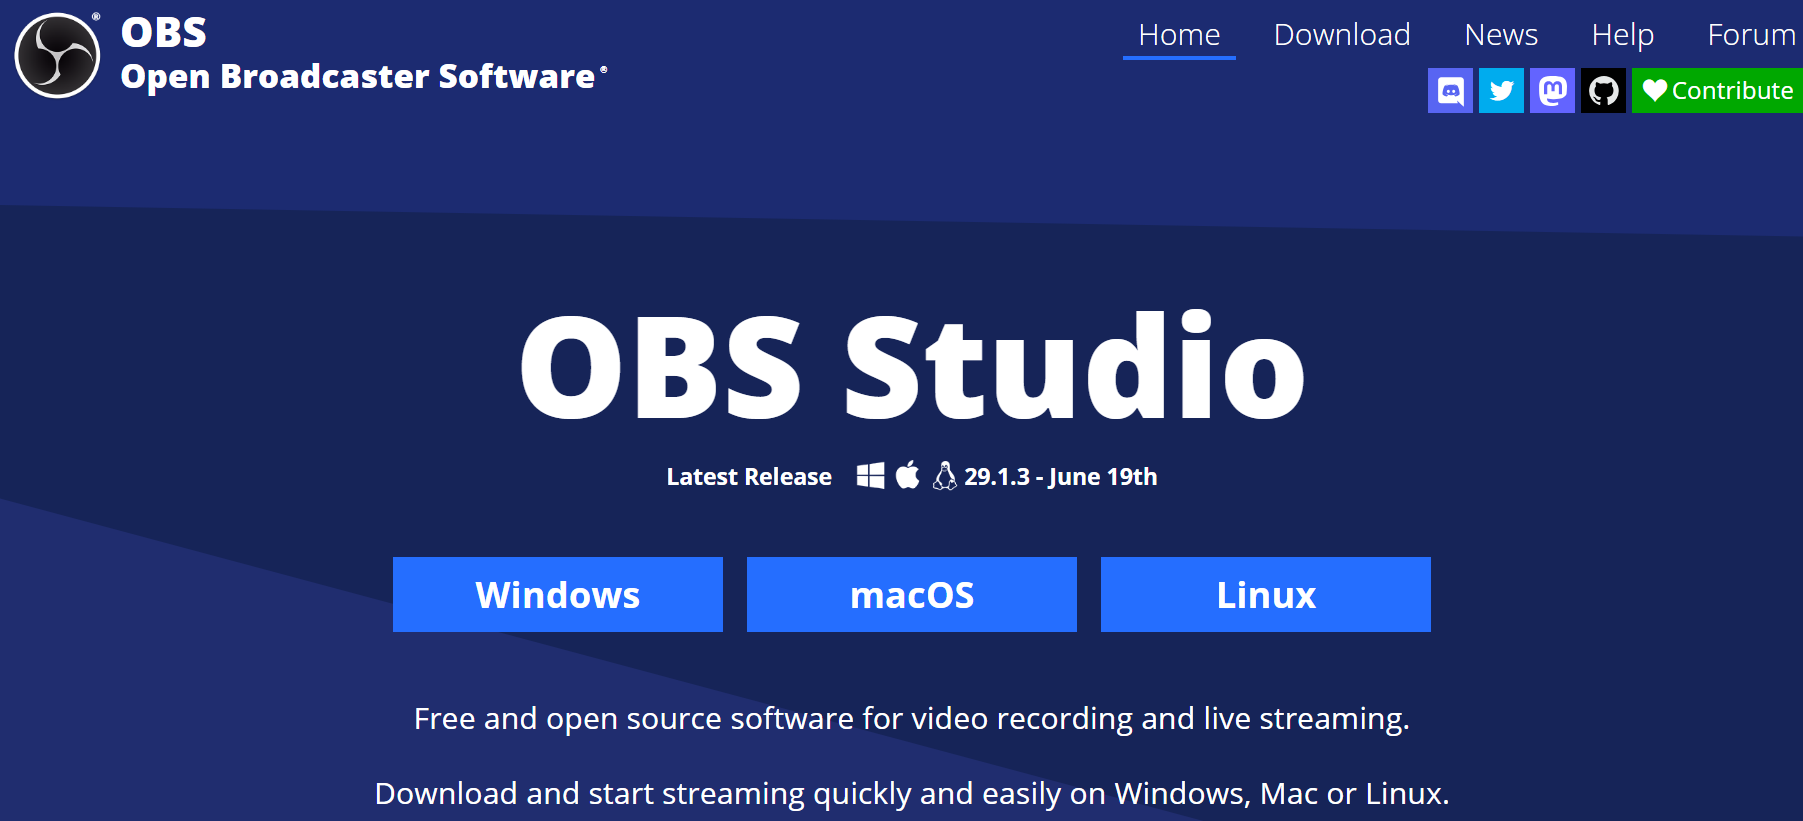 OBS Studio (Open Broadcaster Software)